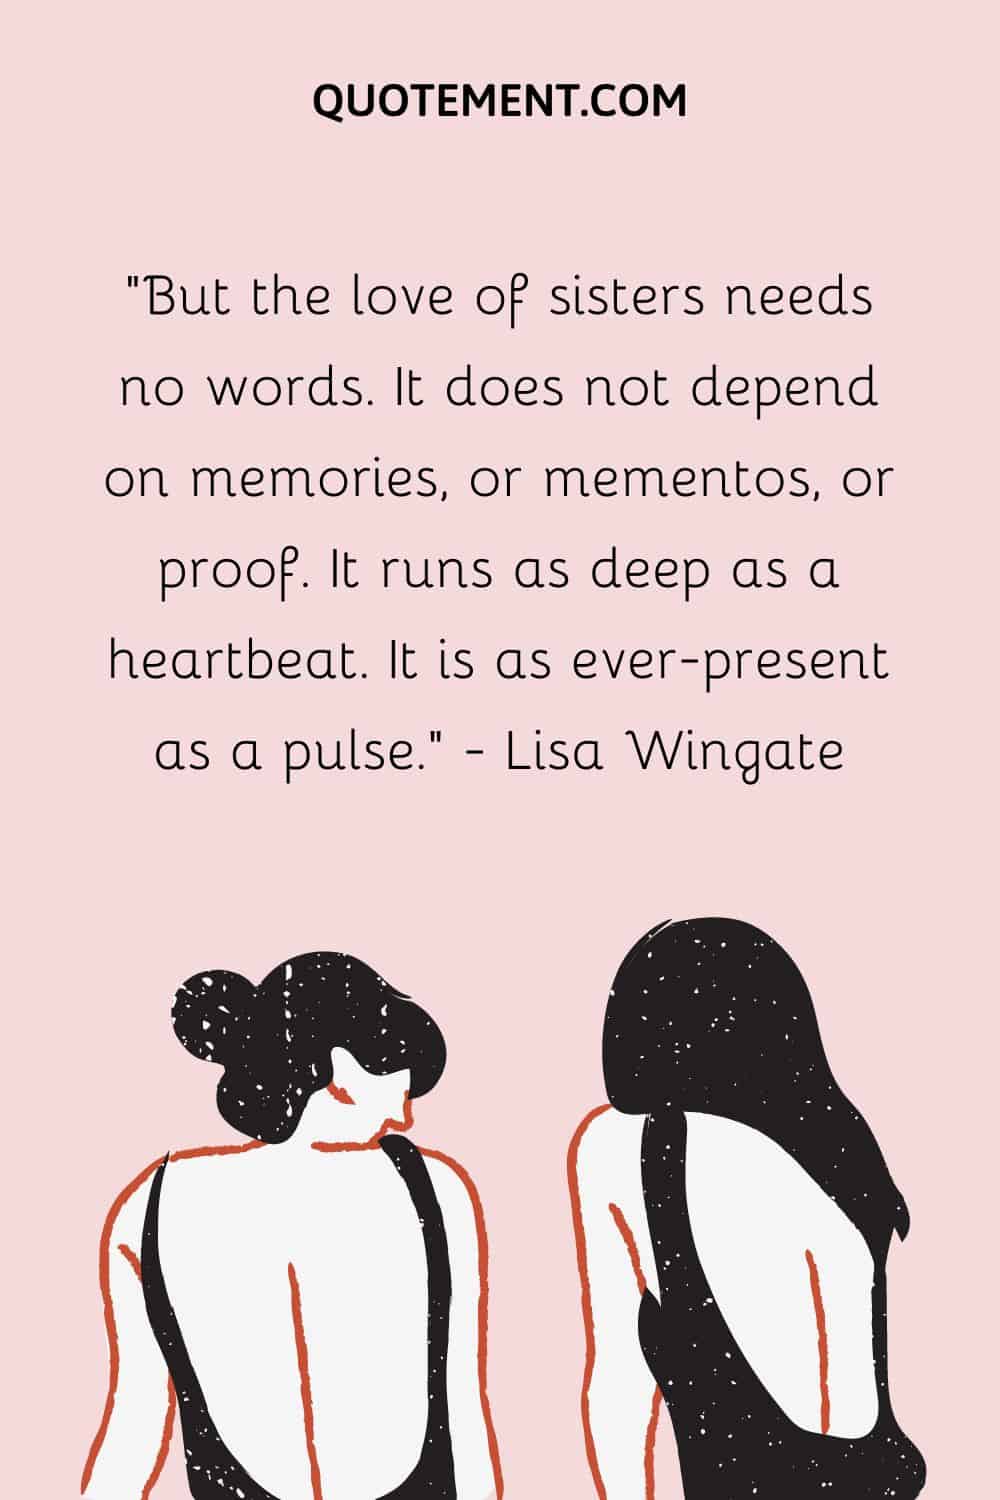 But the love of sisters needs no words